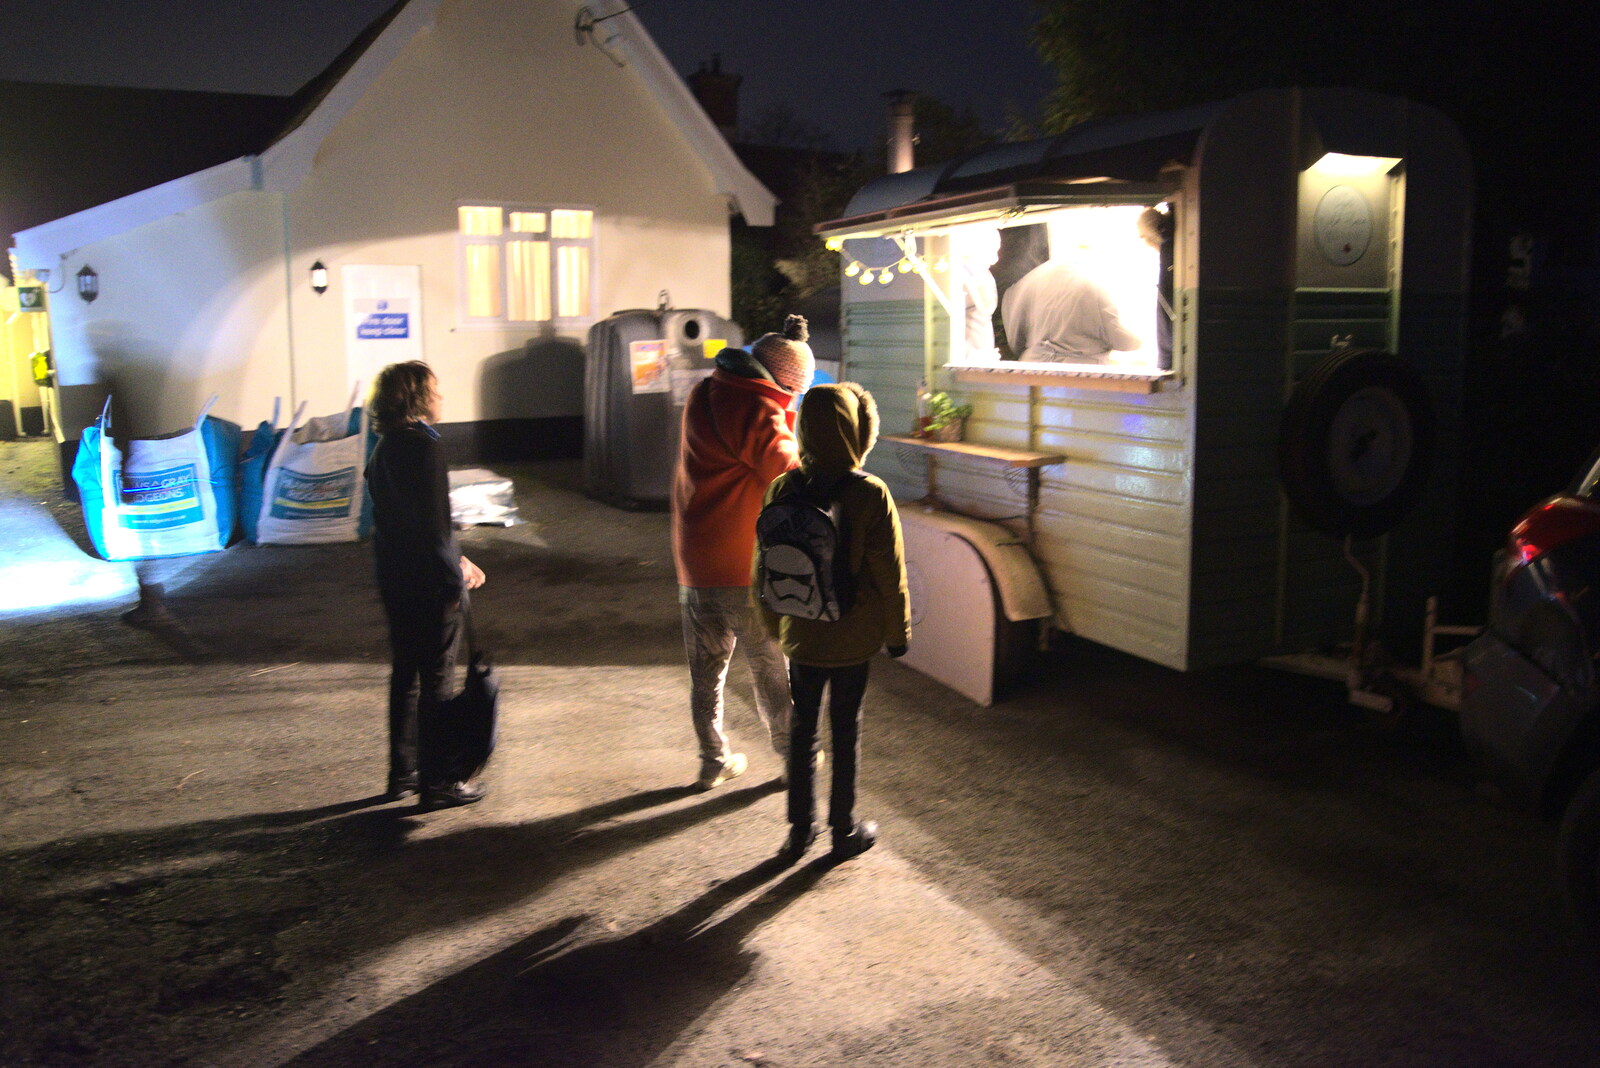 There's a pizza van outside the village hall from Supercharged Electrons and Pizza at the Village Hall, Brome, Suffolk - 23rd January 2022